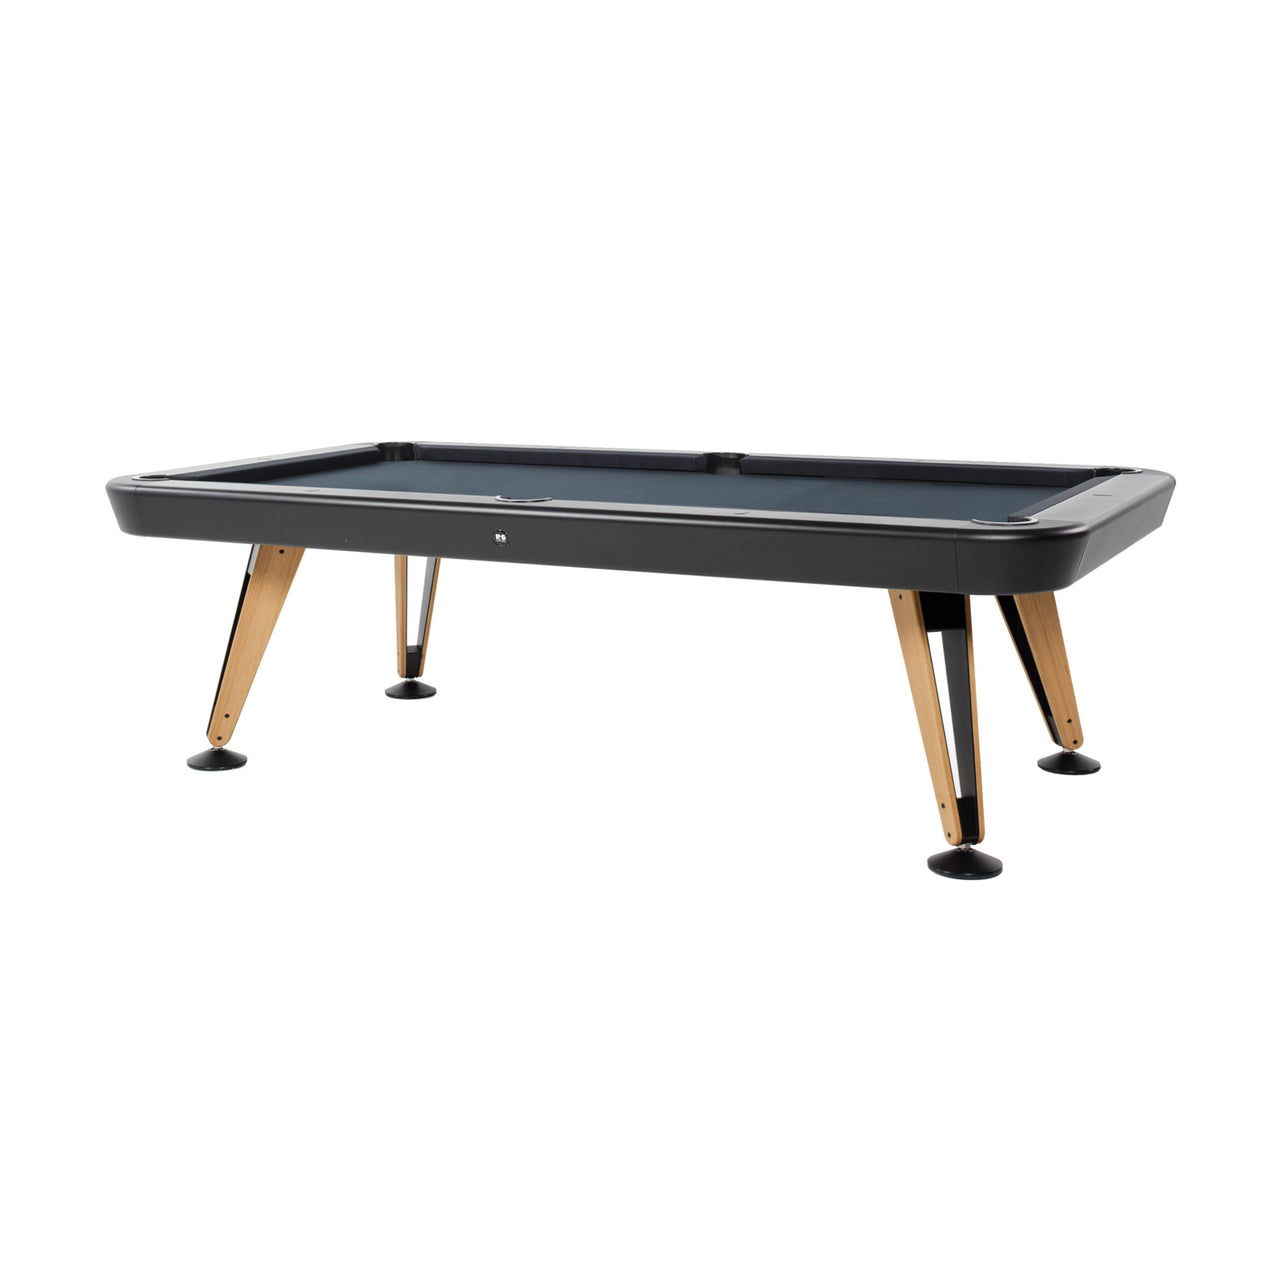 Diagonal Outdoor Pool Table: Large - 102.4